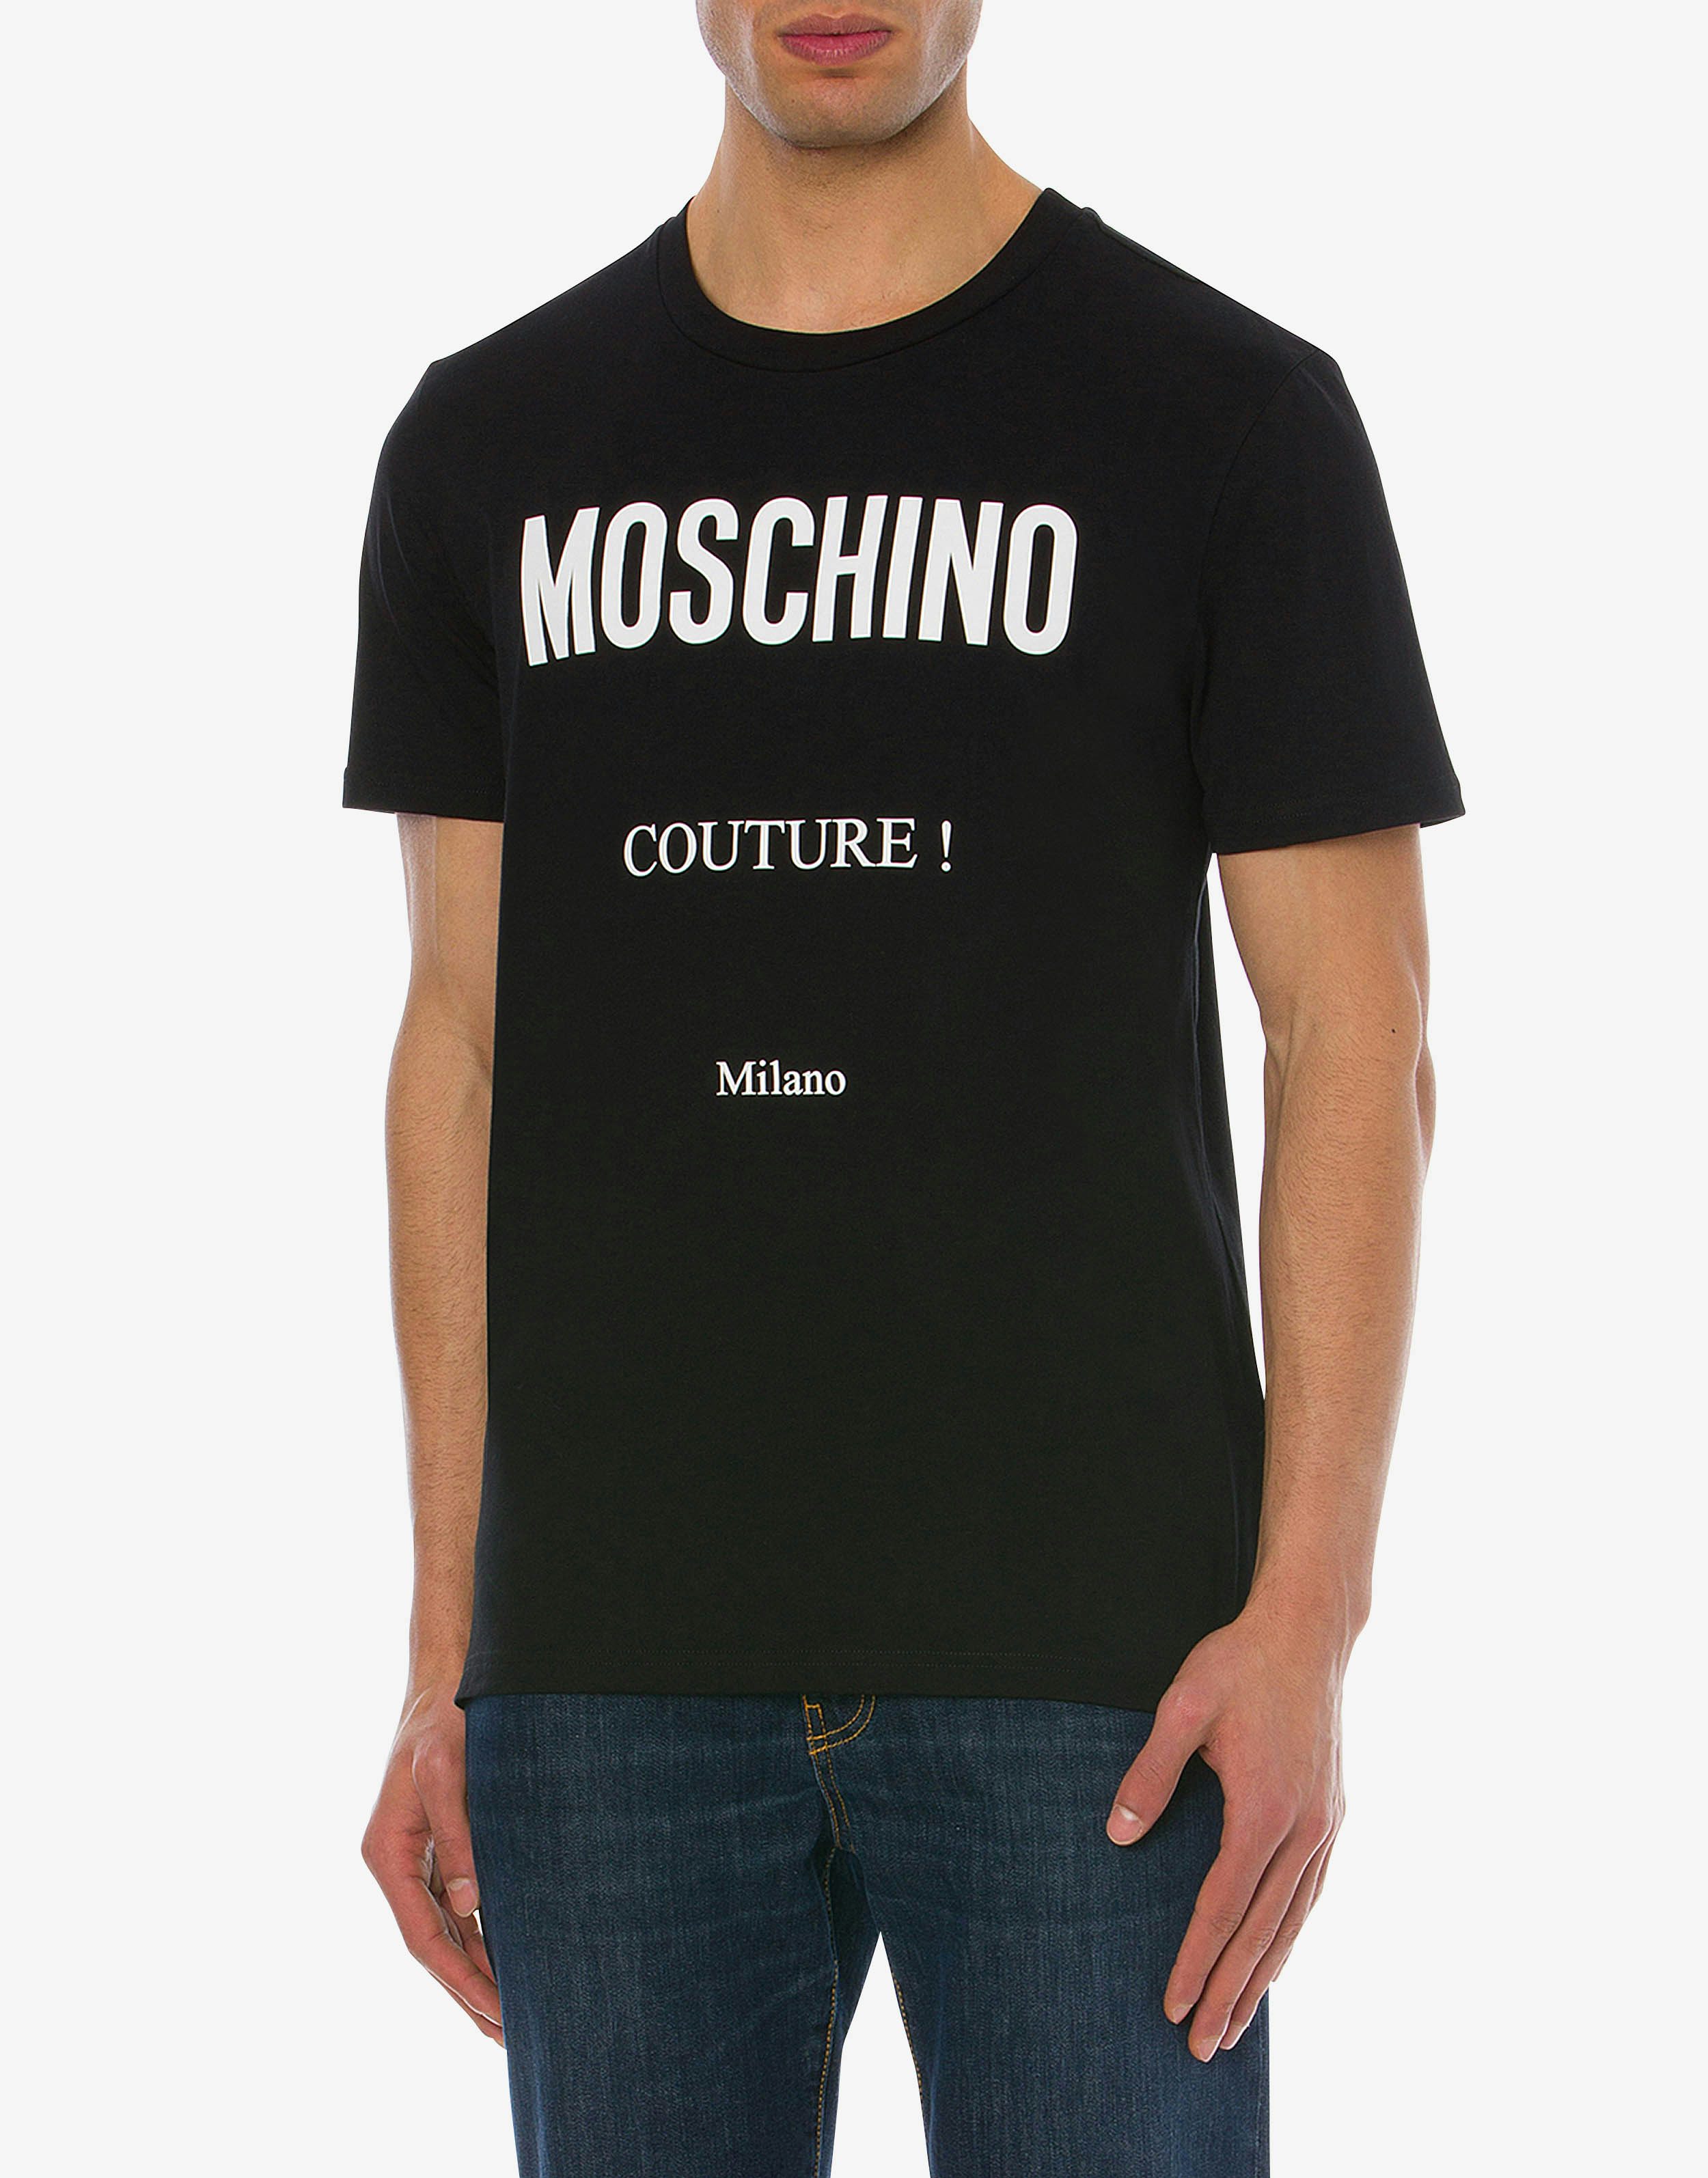 t-shirt | Store Couture Jersey Moschino Official Moschino